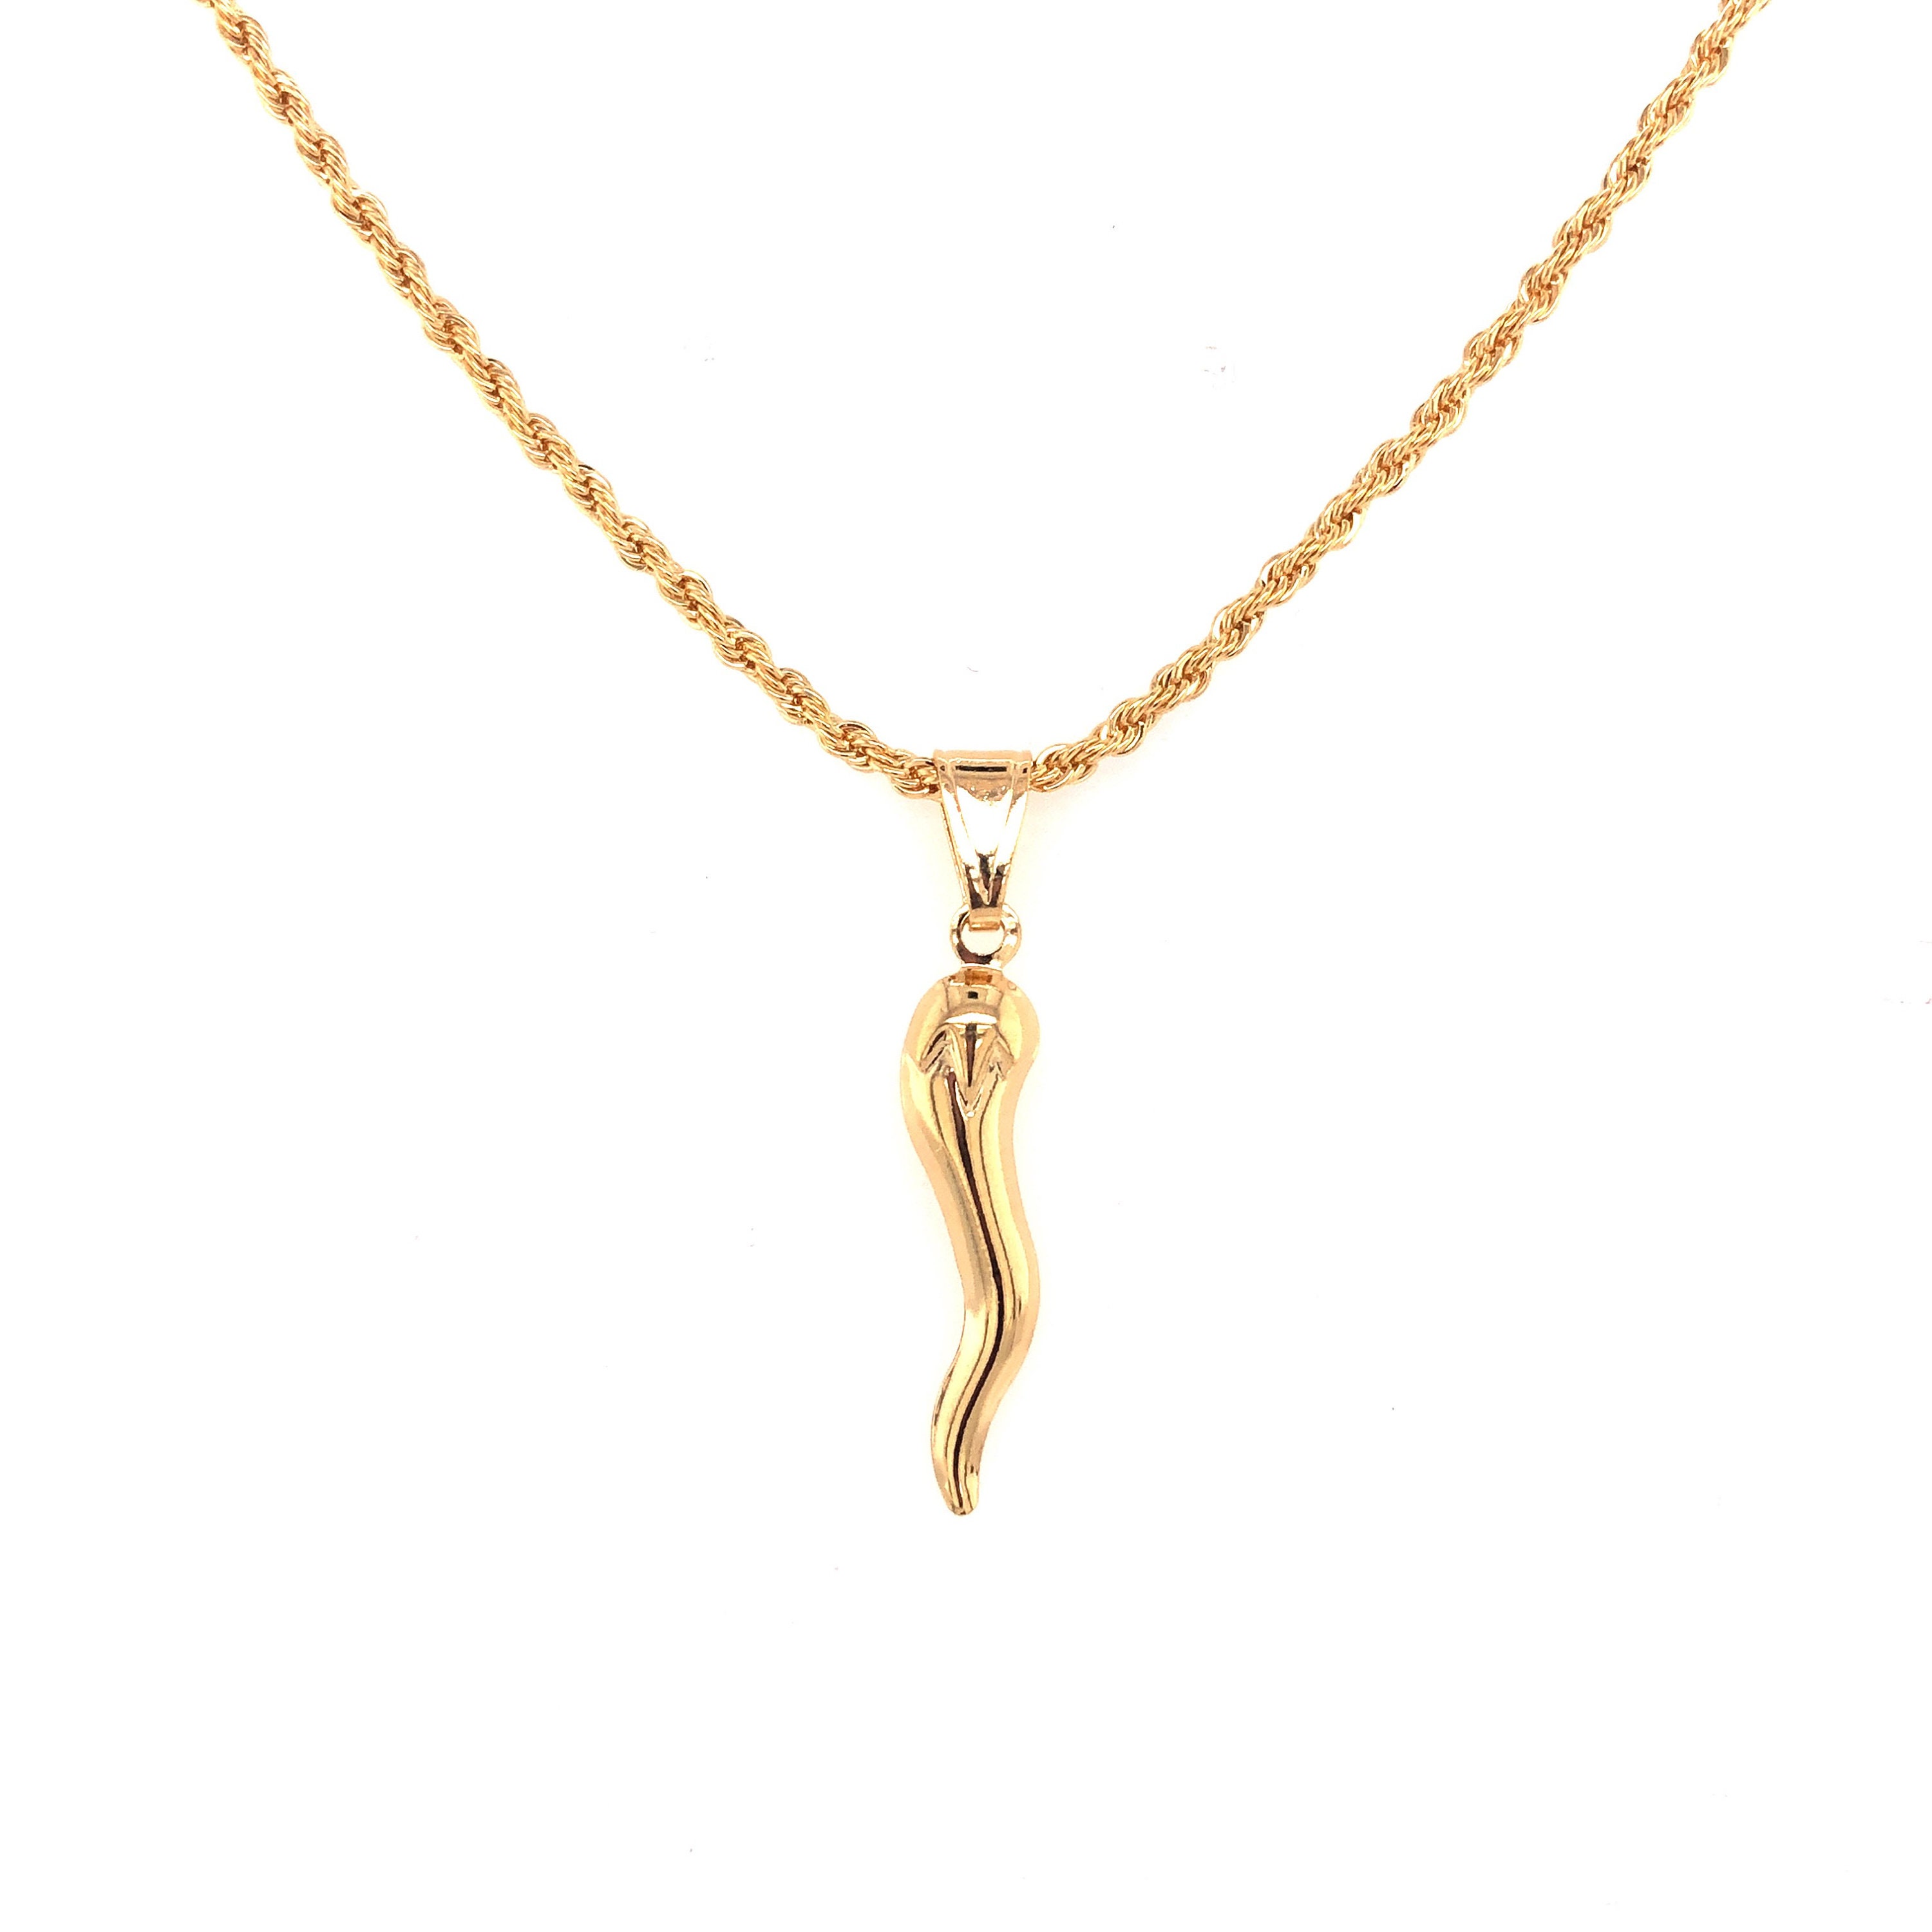 Italian Hand Charm Horn Manocorno for Necklace in Gold 18 kt